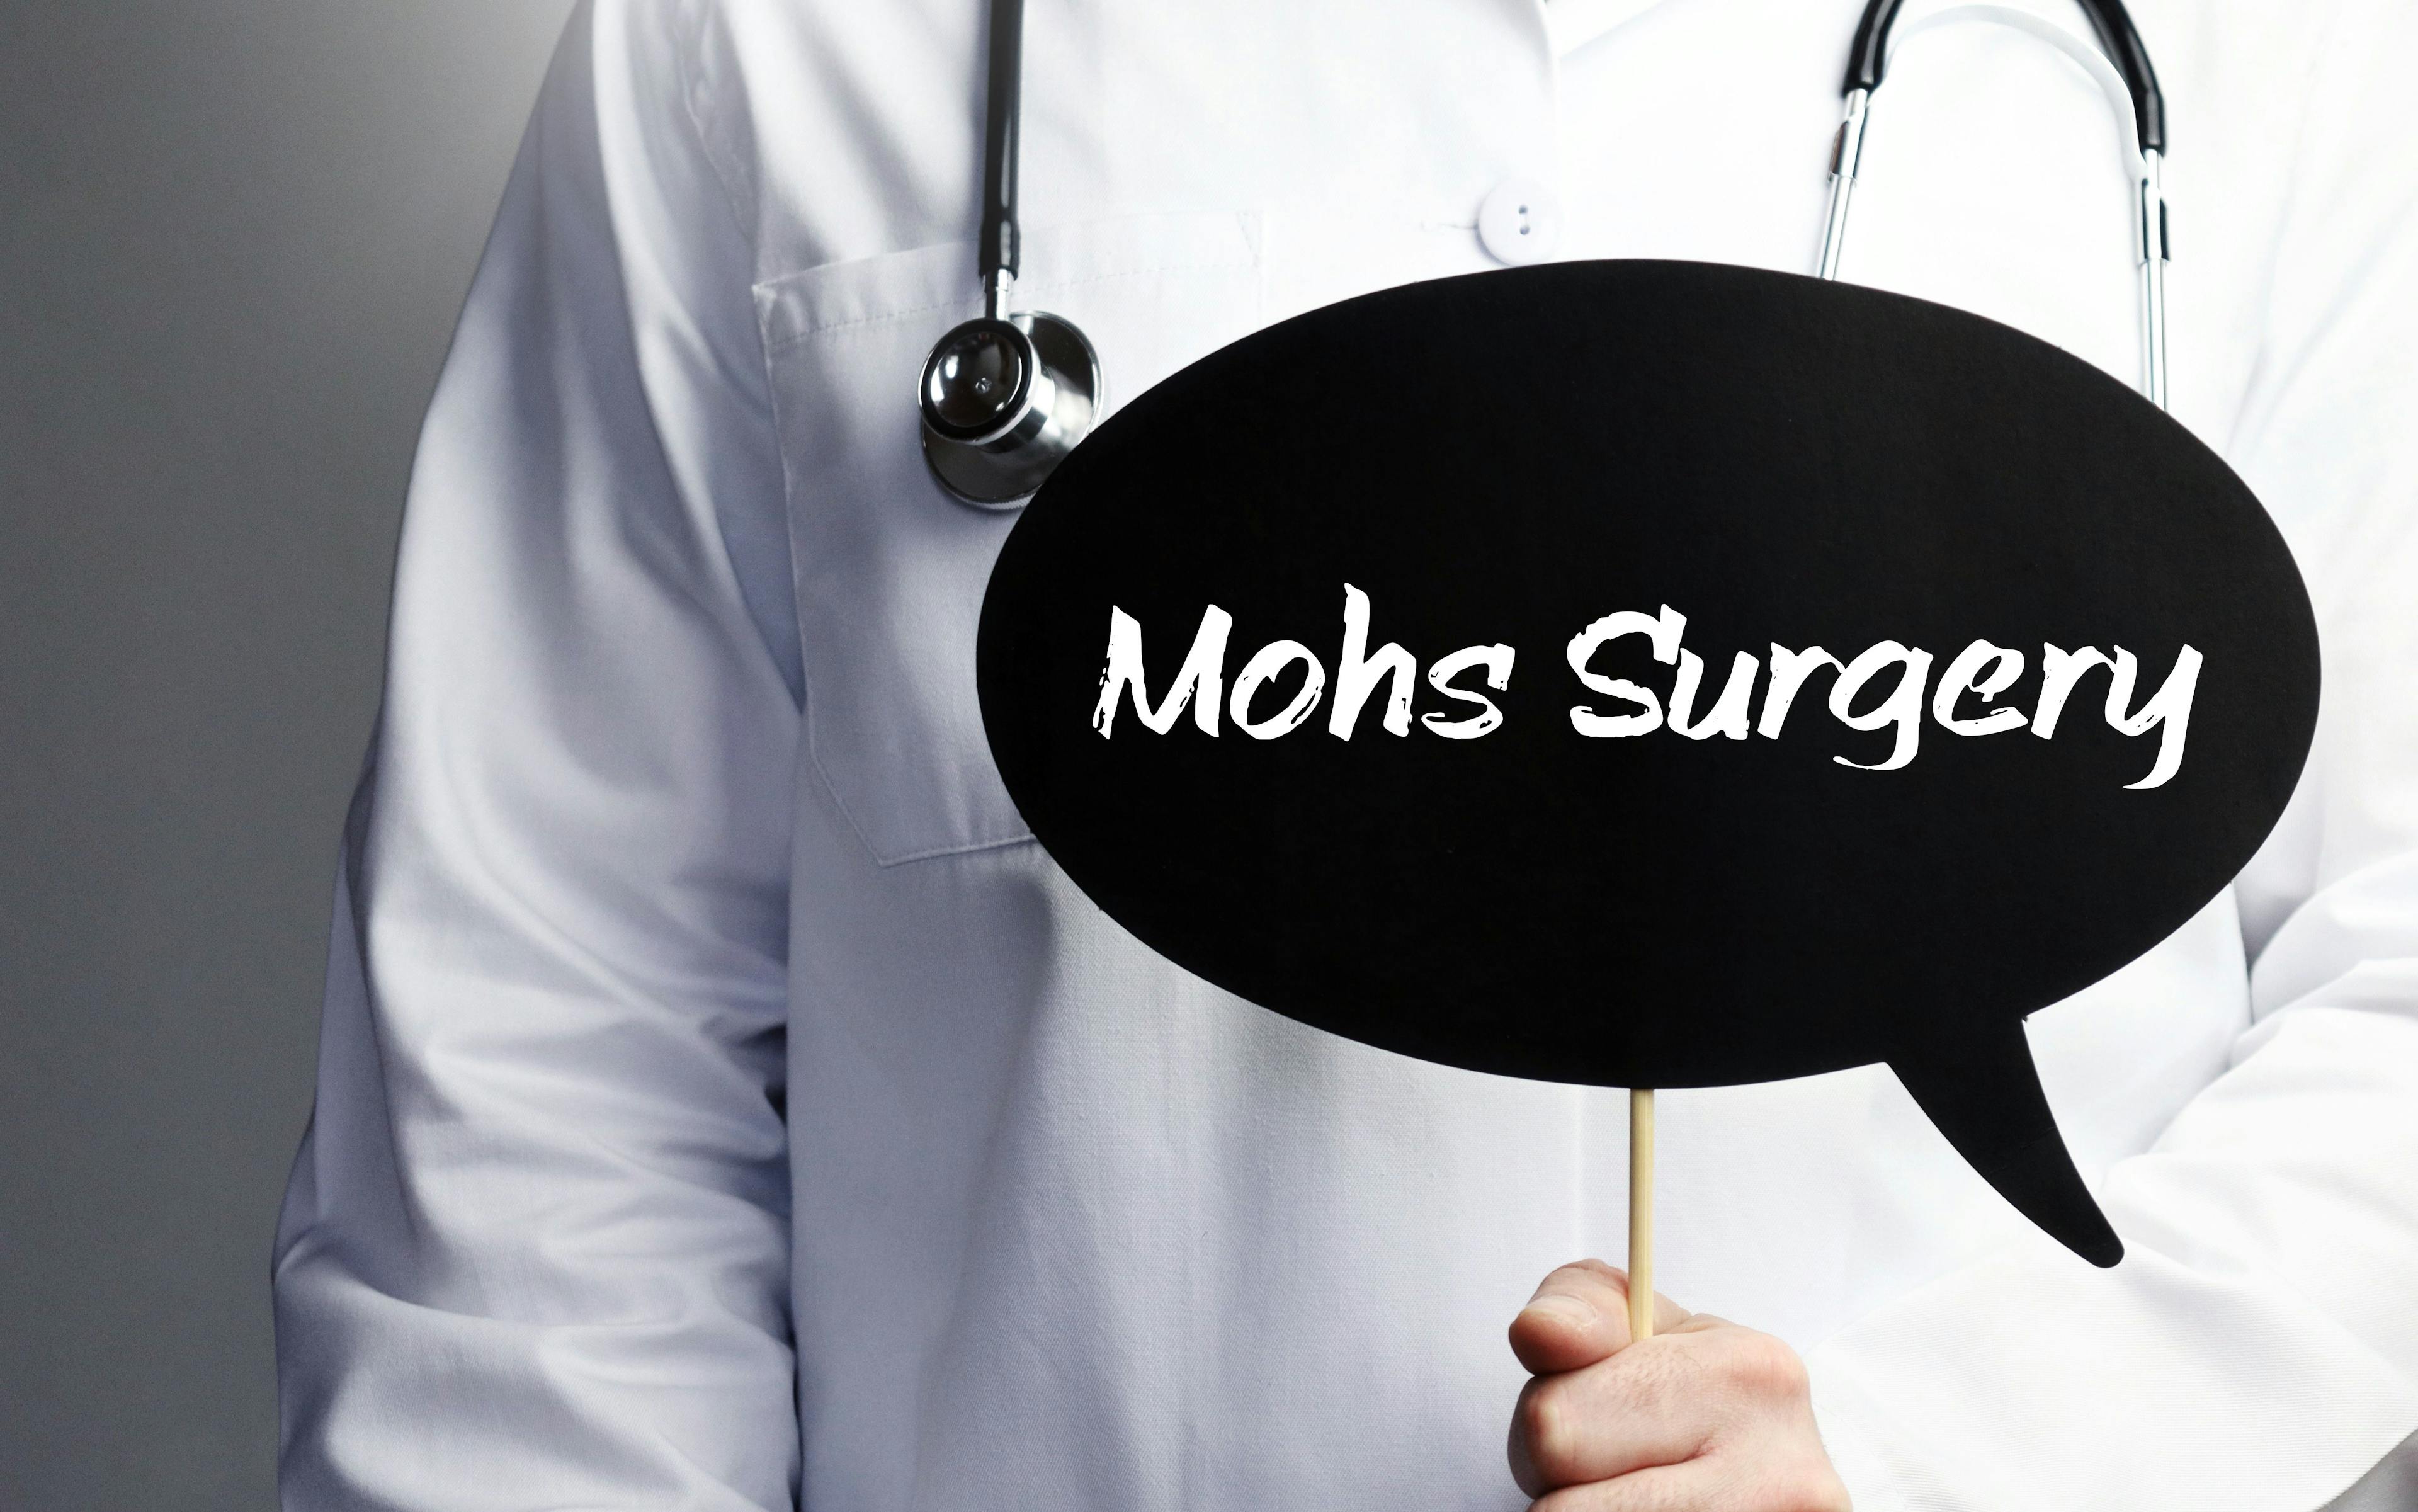 Mohs Surgery. Doctor with stethoscope holds speech bubble in hand. Text is on the sign. Healthcare, medicine | Image credit: © MQ-Illustrations - © stock.adobe.com